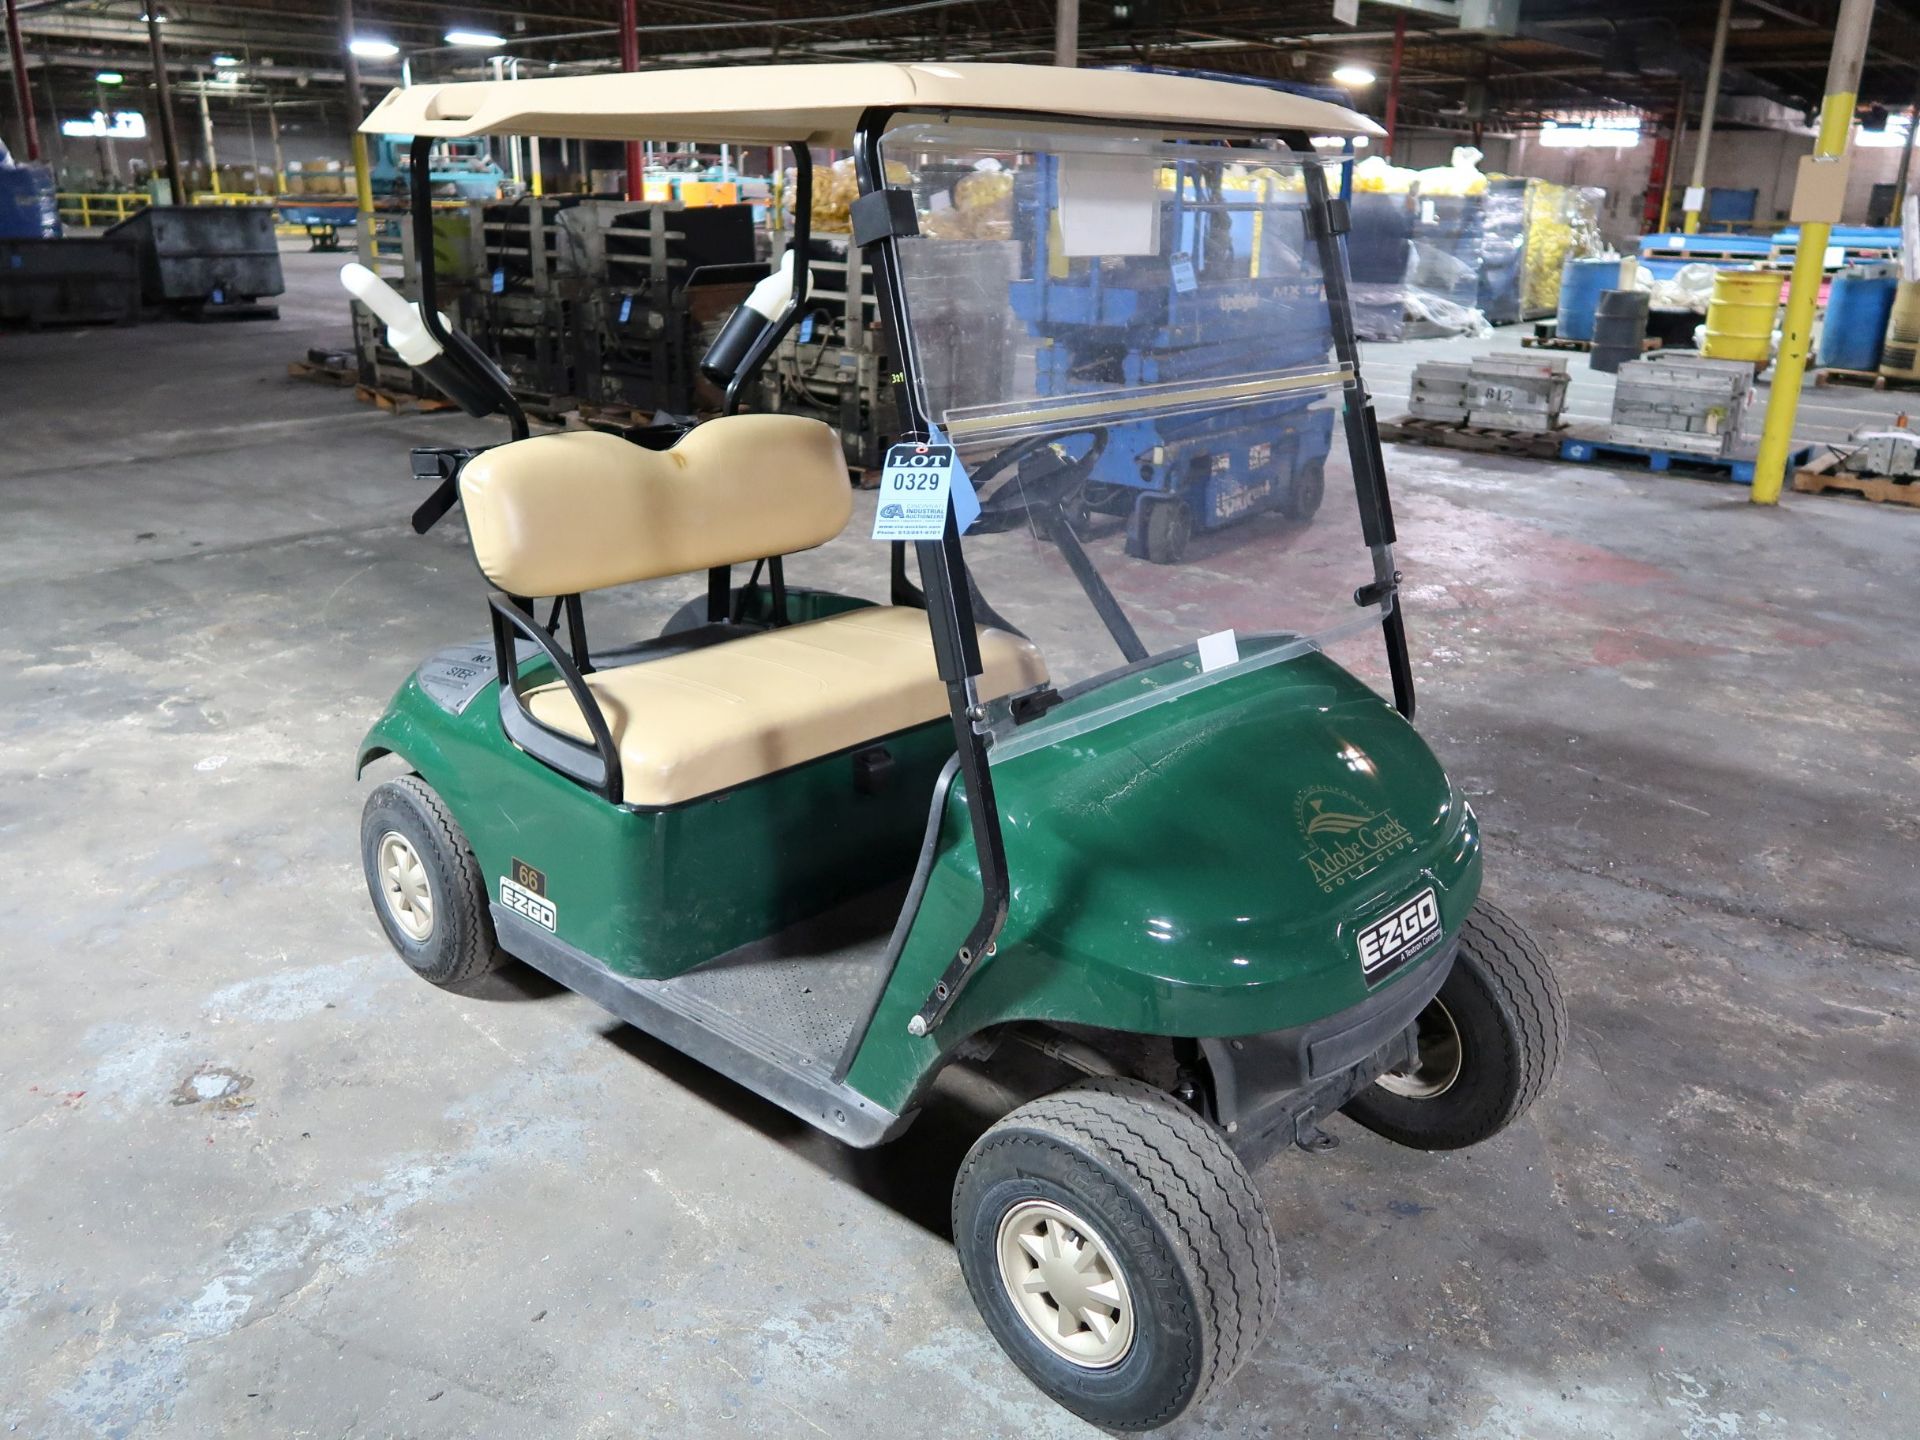 EZ-GO ELECTRIC GOLF CART WITH CHARGER, 48 VOLT